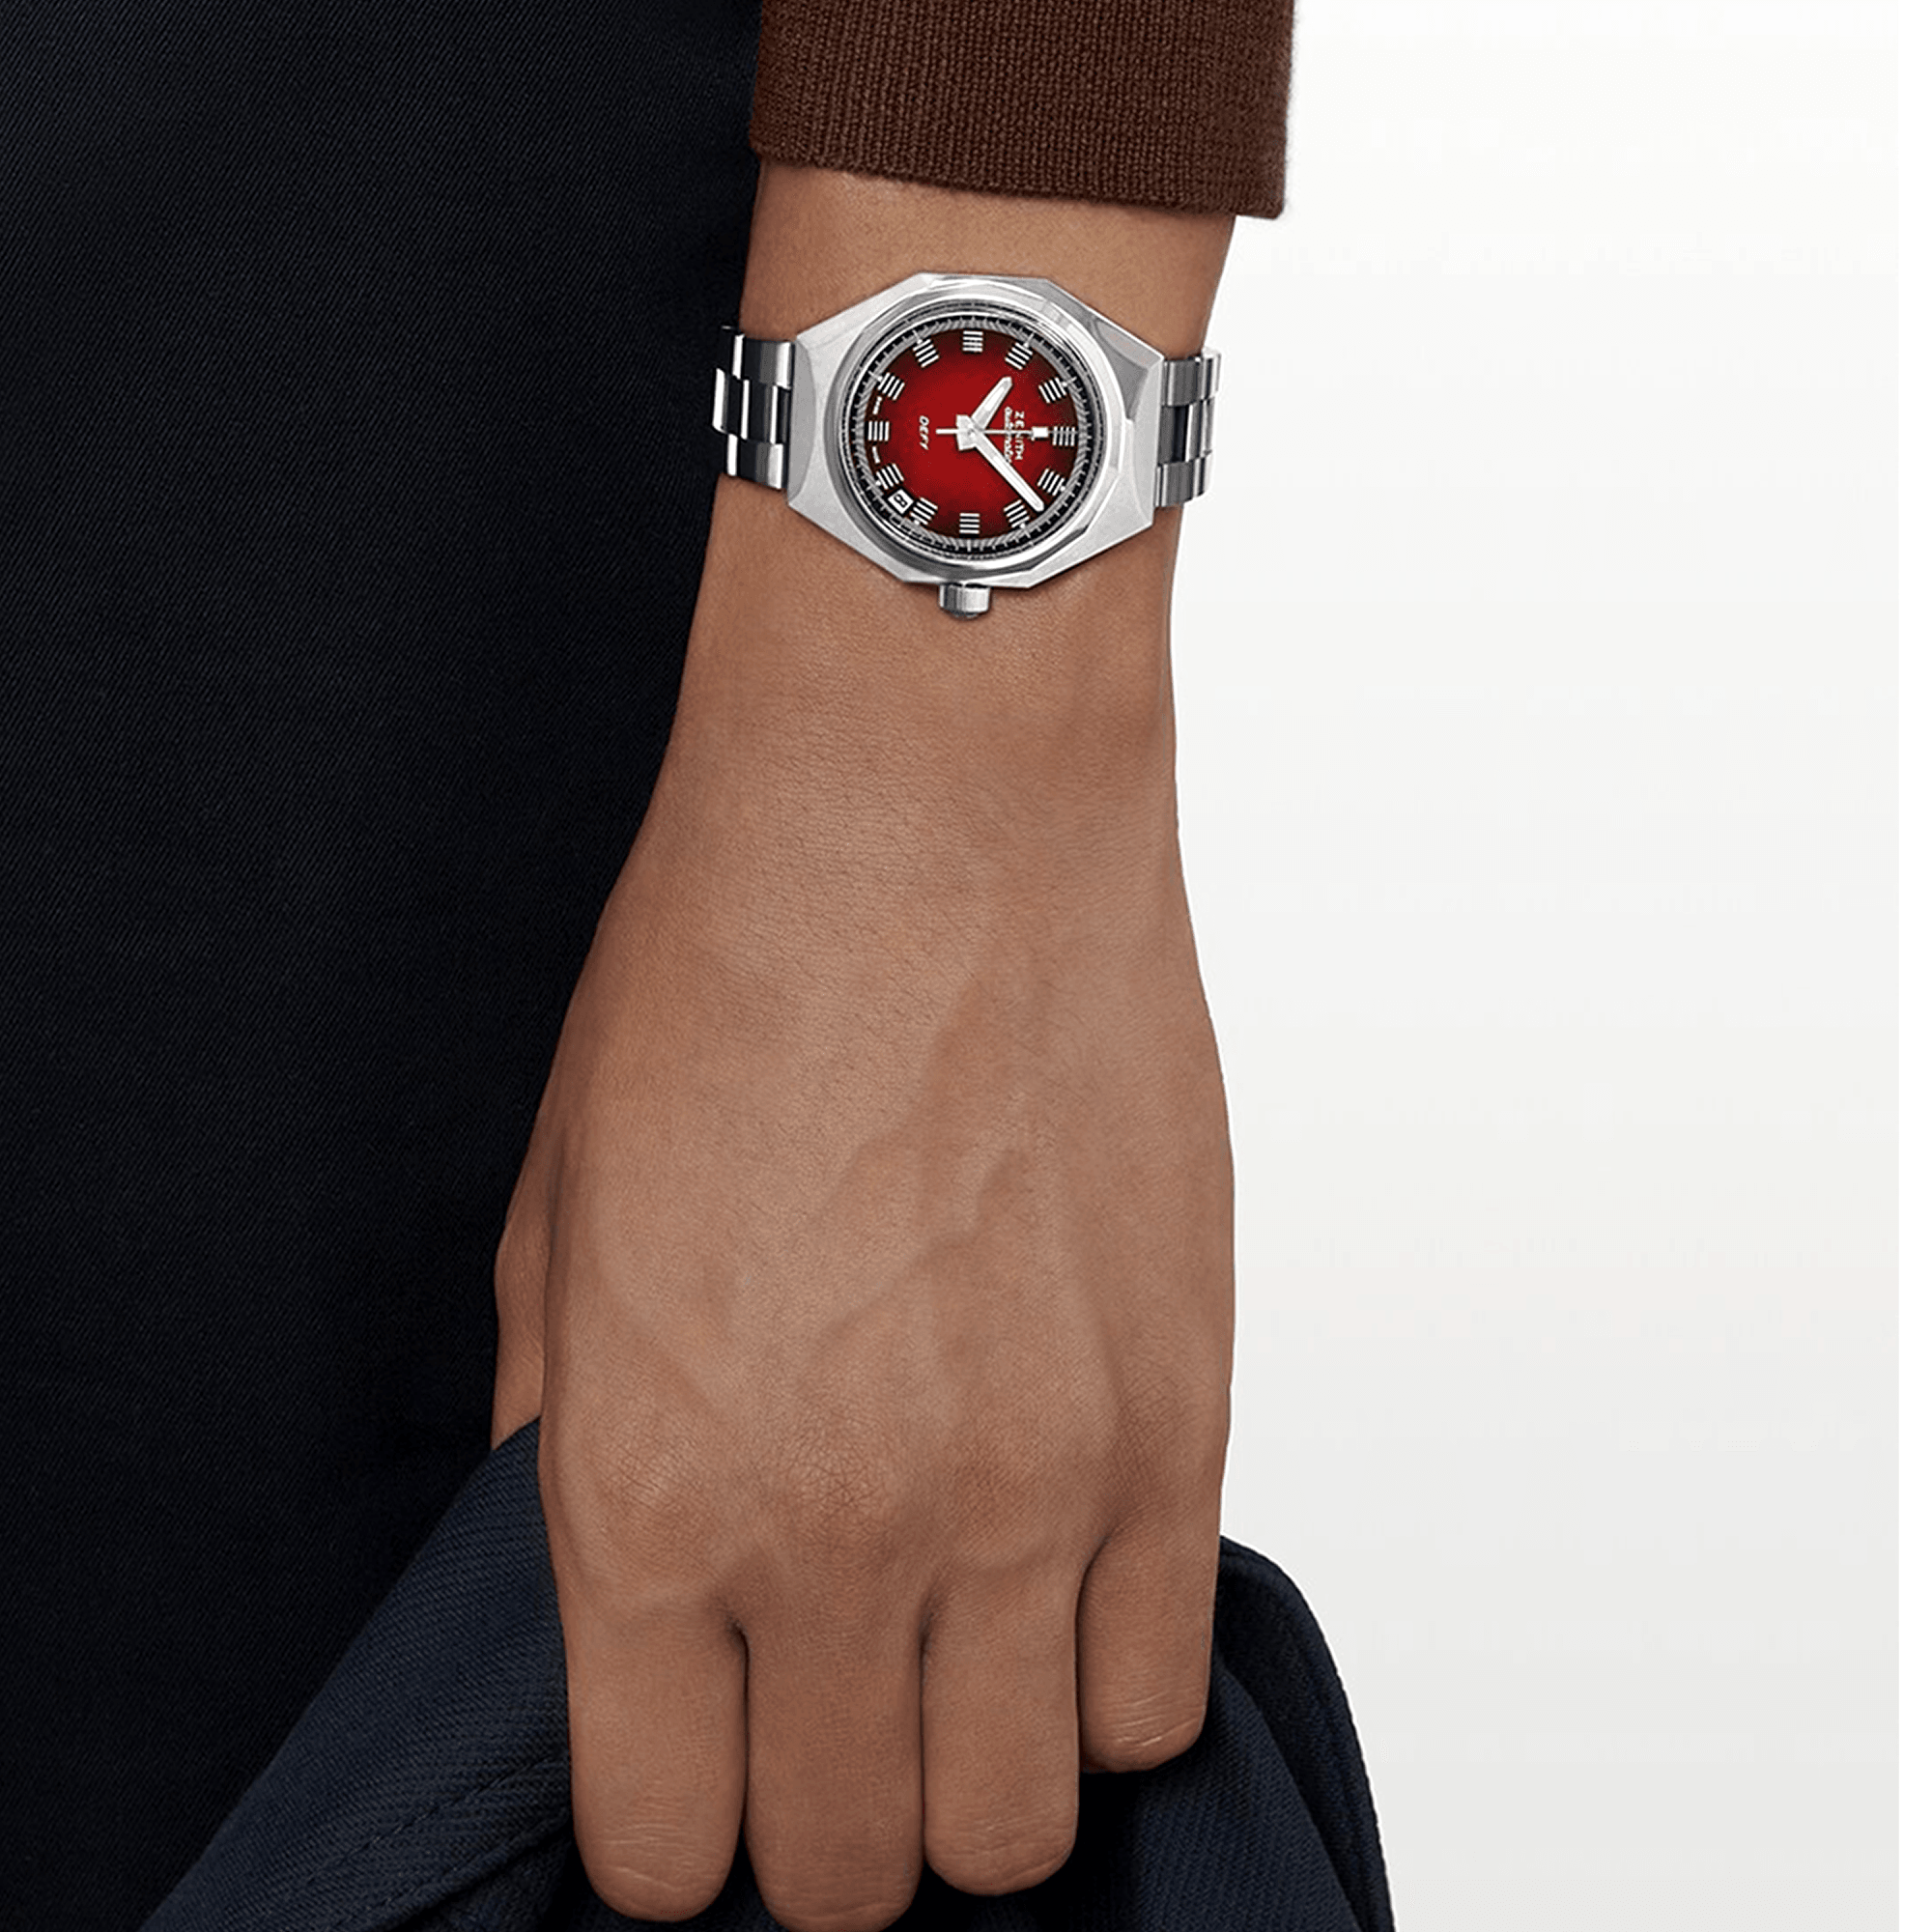 DEFY Revival A3691 37mm Ruby Red Dial Automatic Bracelet Watch